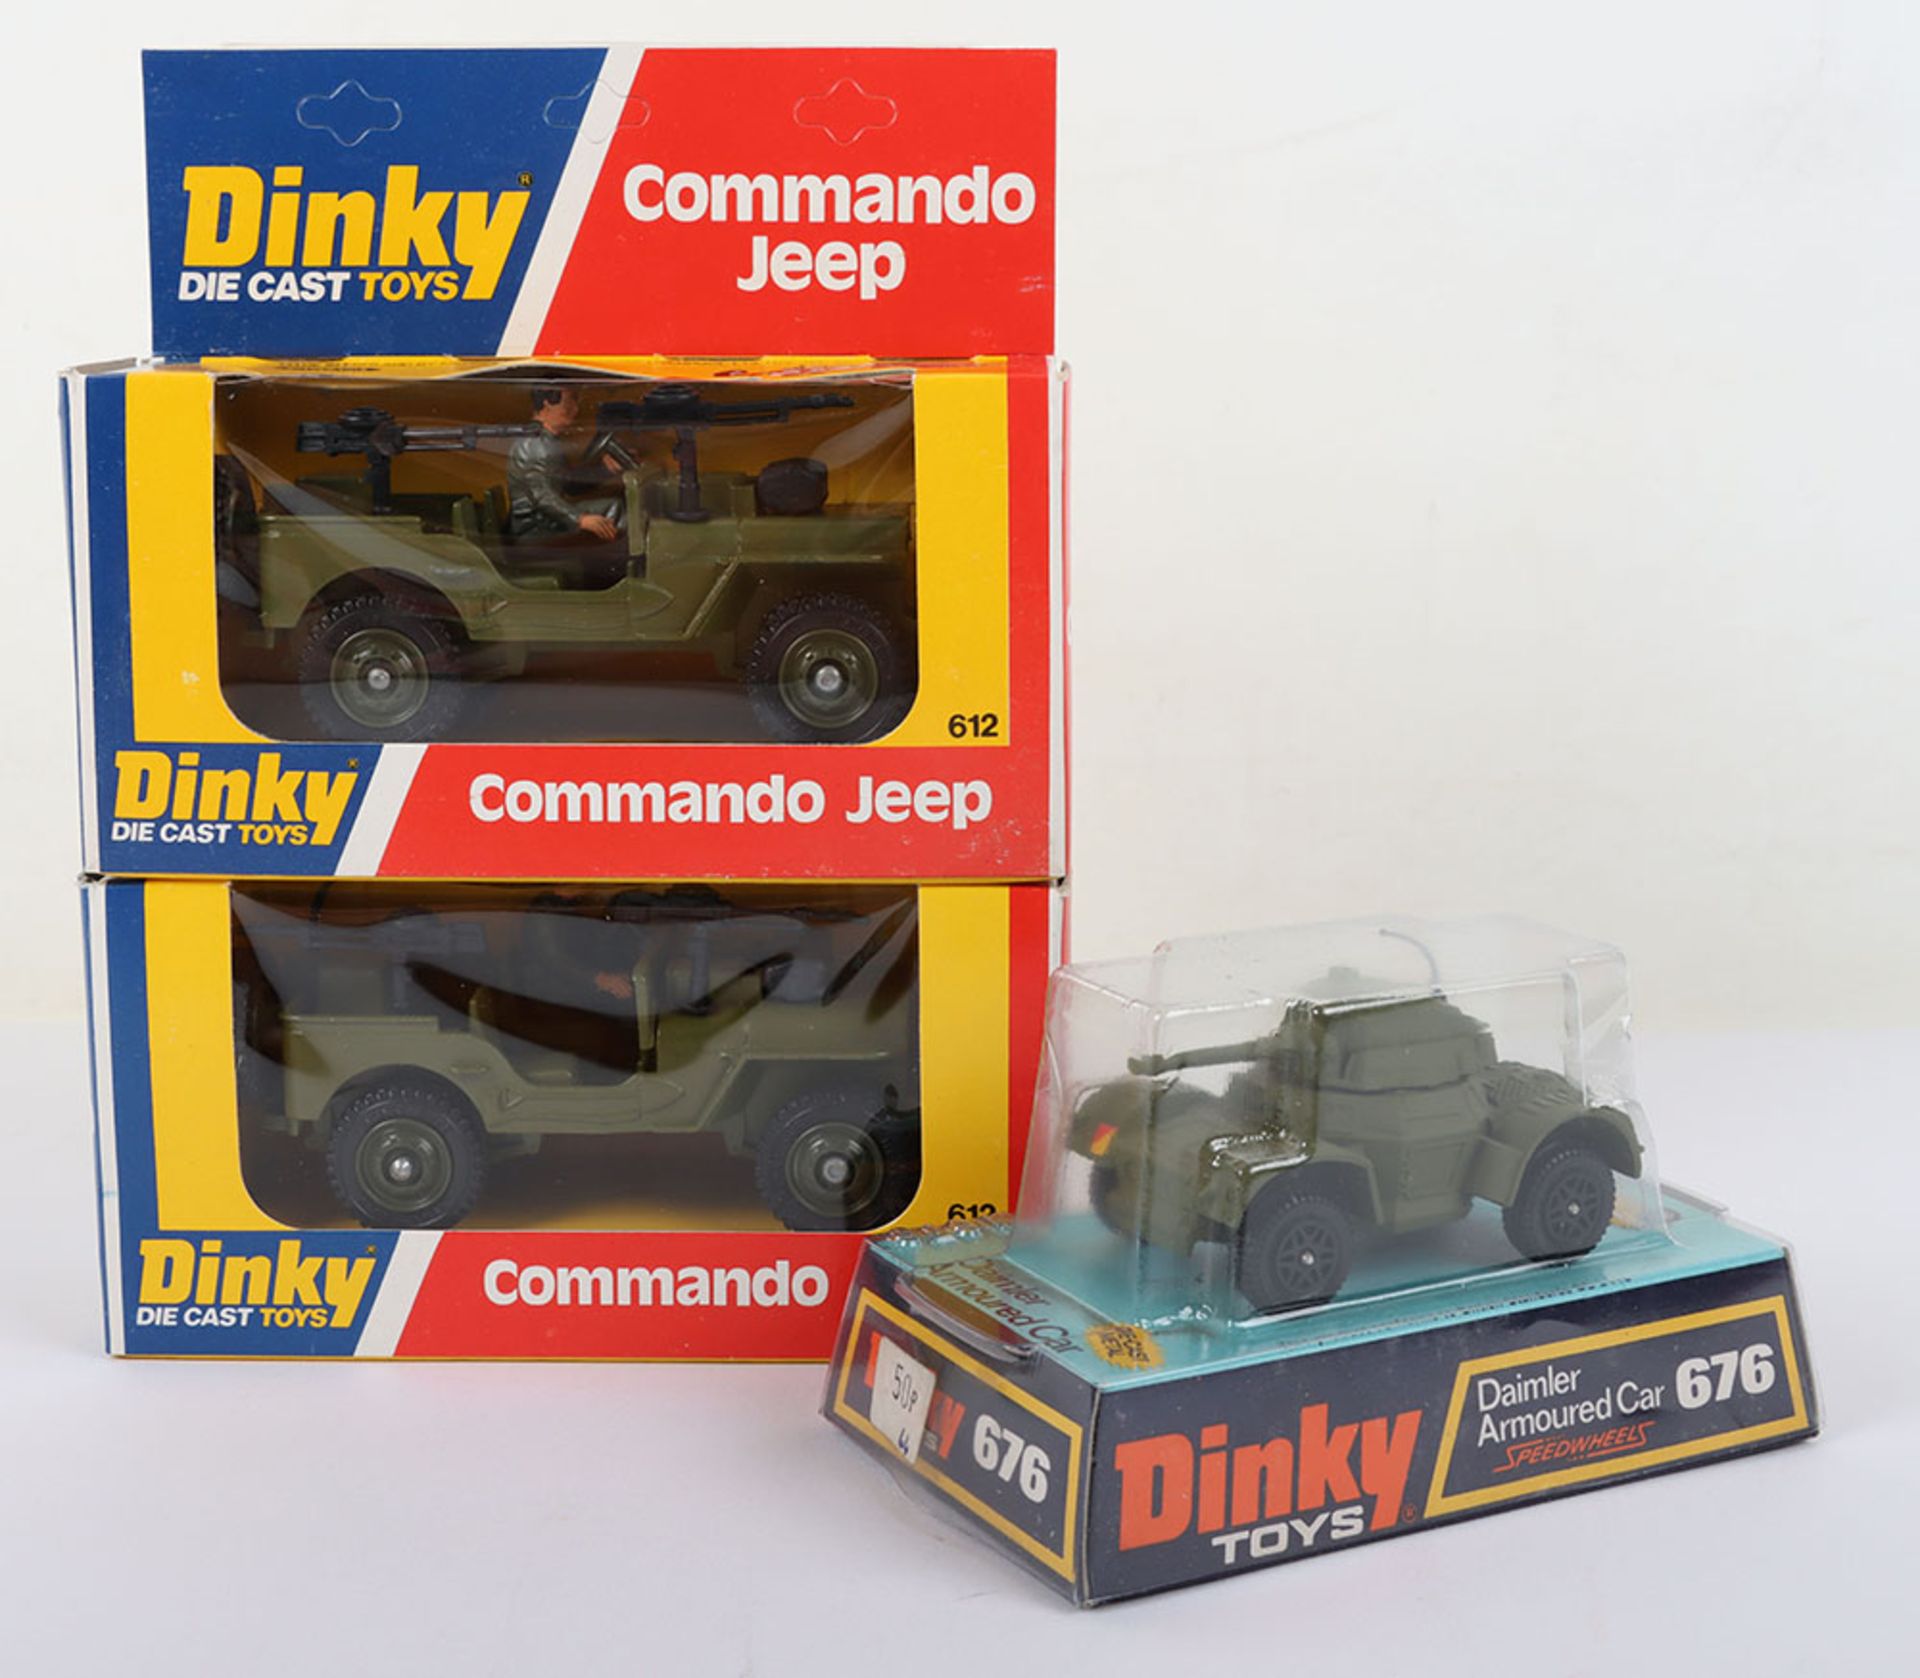 Two Dinky Toys 612 Commando Jeeps